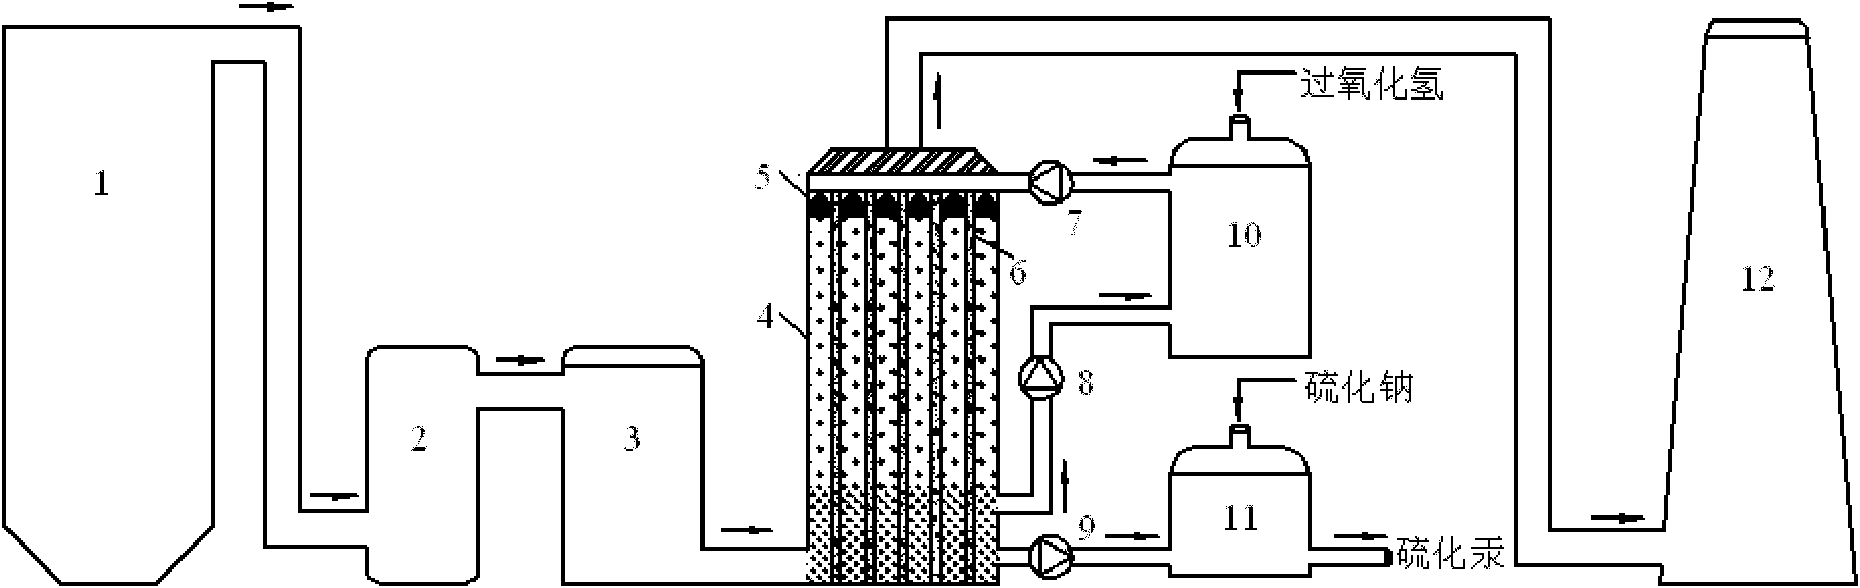 Flue gas mercury removal system based on photochemical advanced oxidation